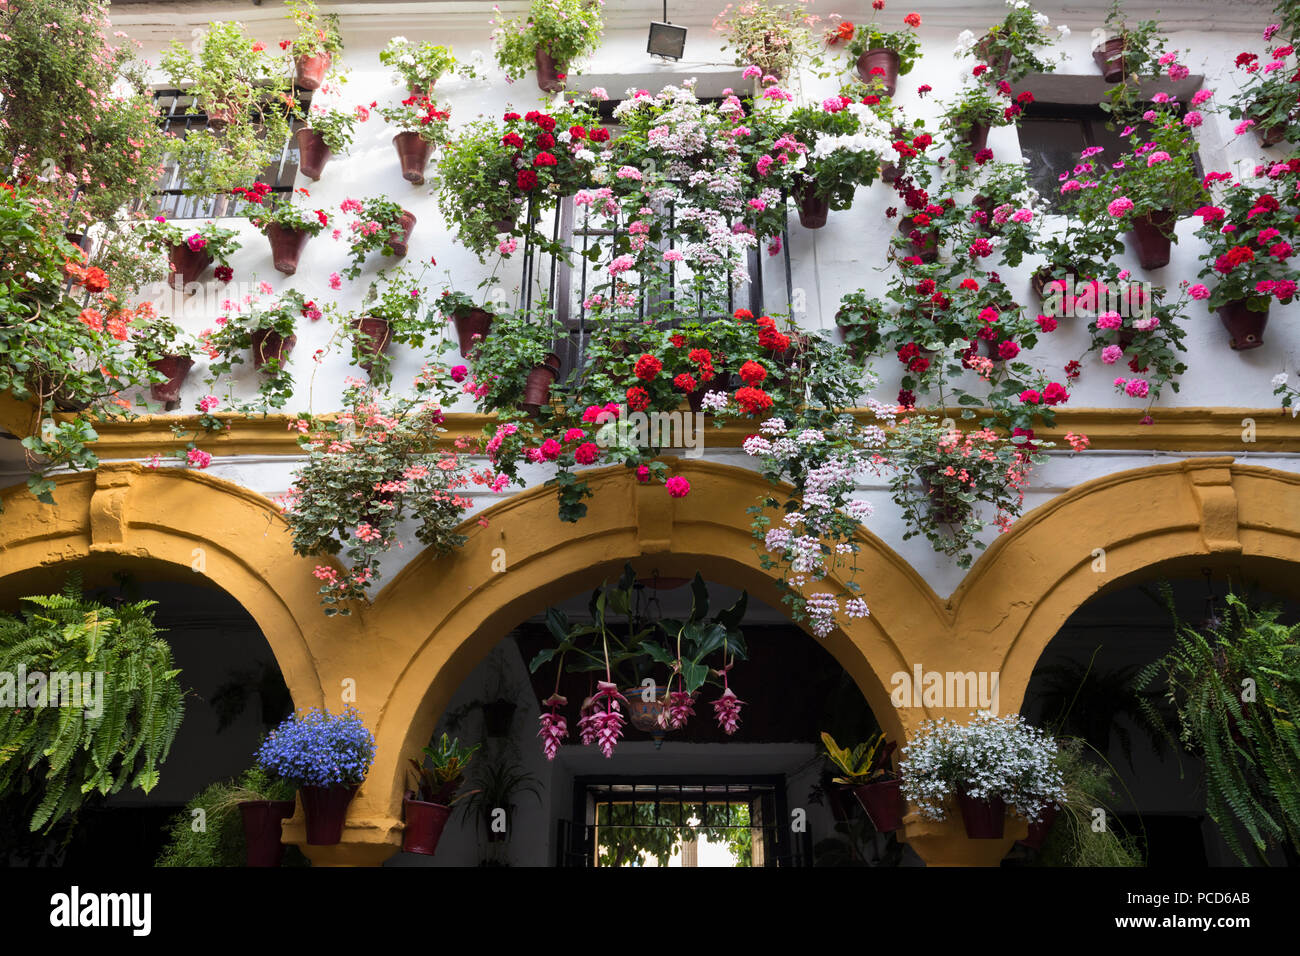 Colourful display of flowers at the Festival of the Patios, Cordoba, Andalucia, Spain, Europe Stock Photo